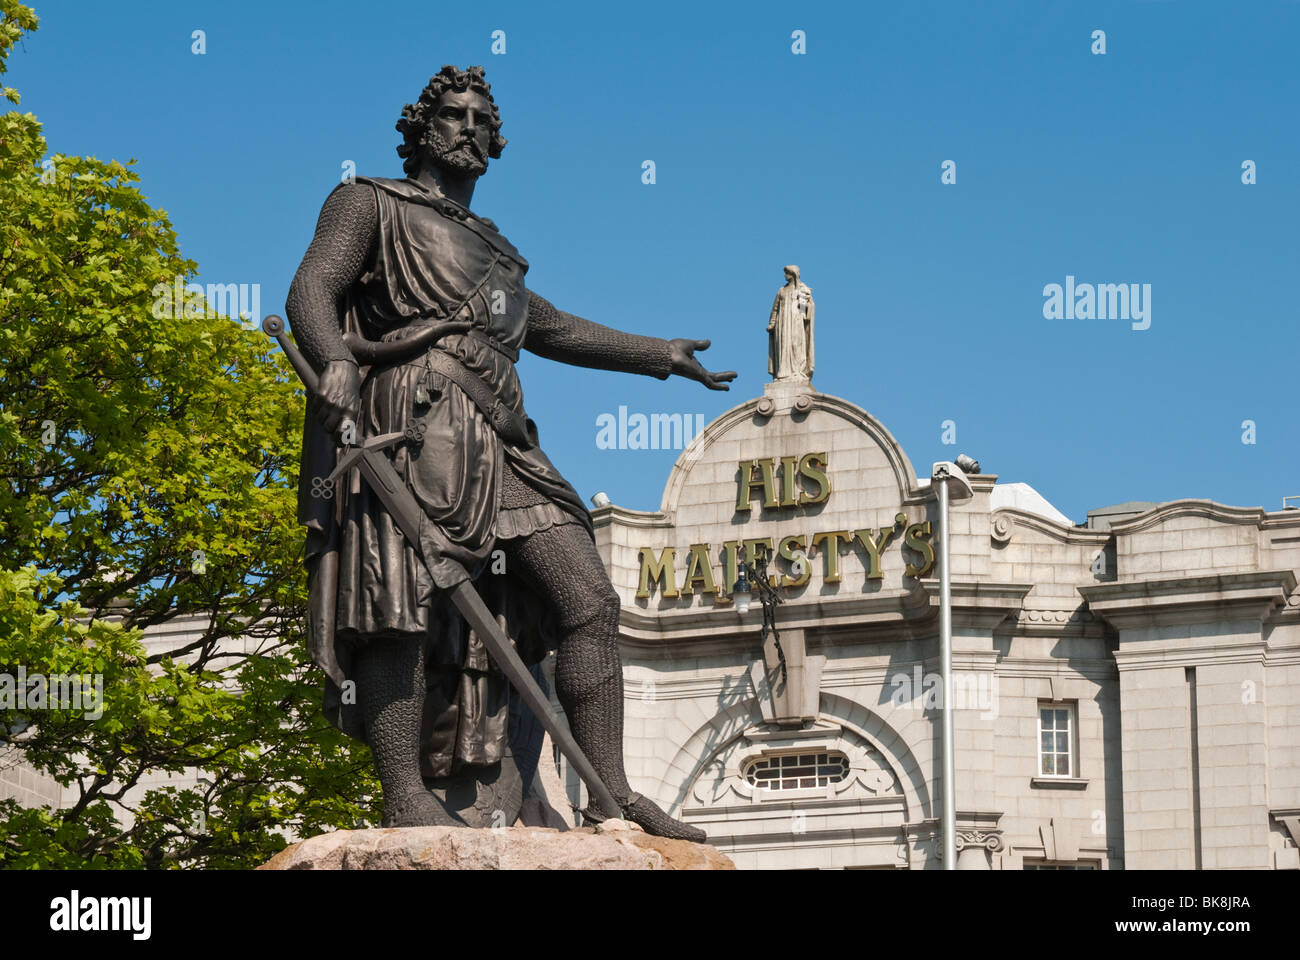 William Wallace Statue with His Majesty's Theatre in Background, Aberdeen, Scotland Stock Photo